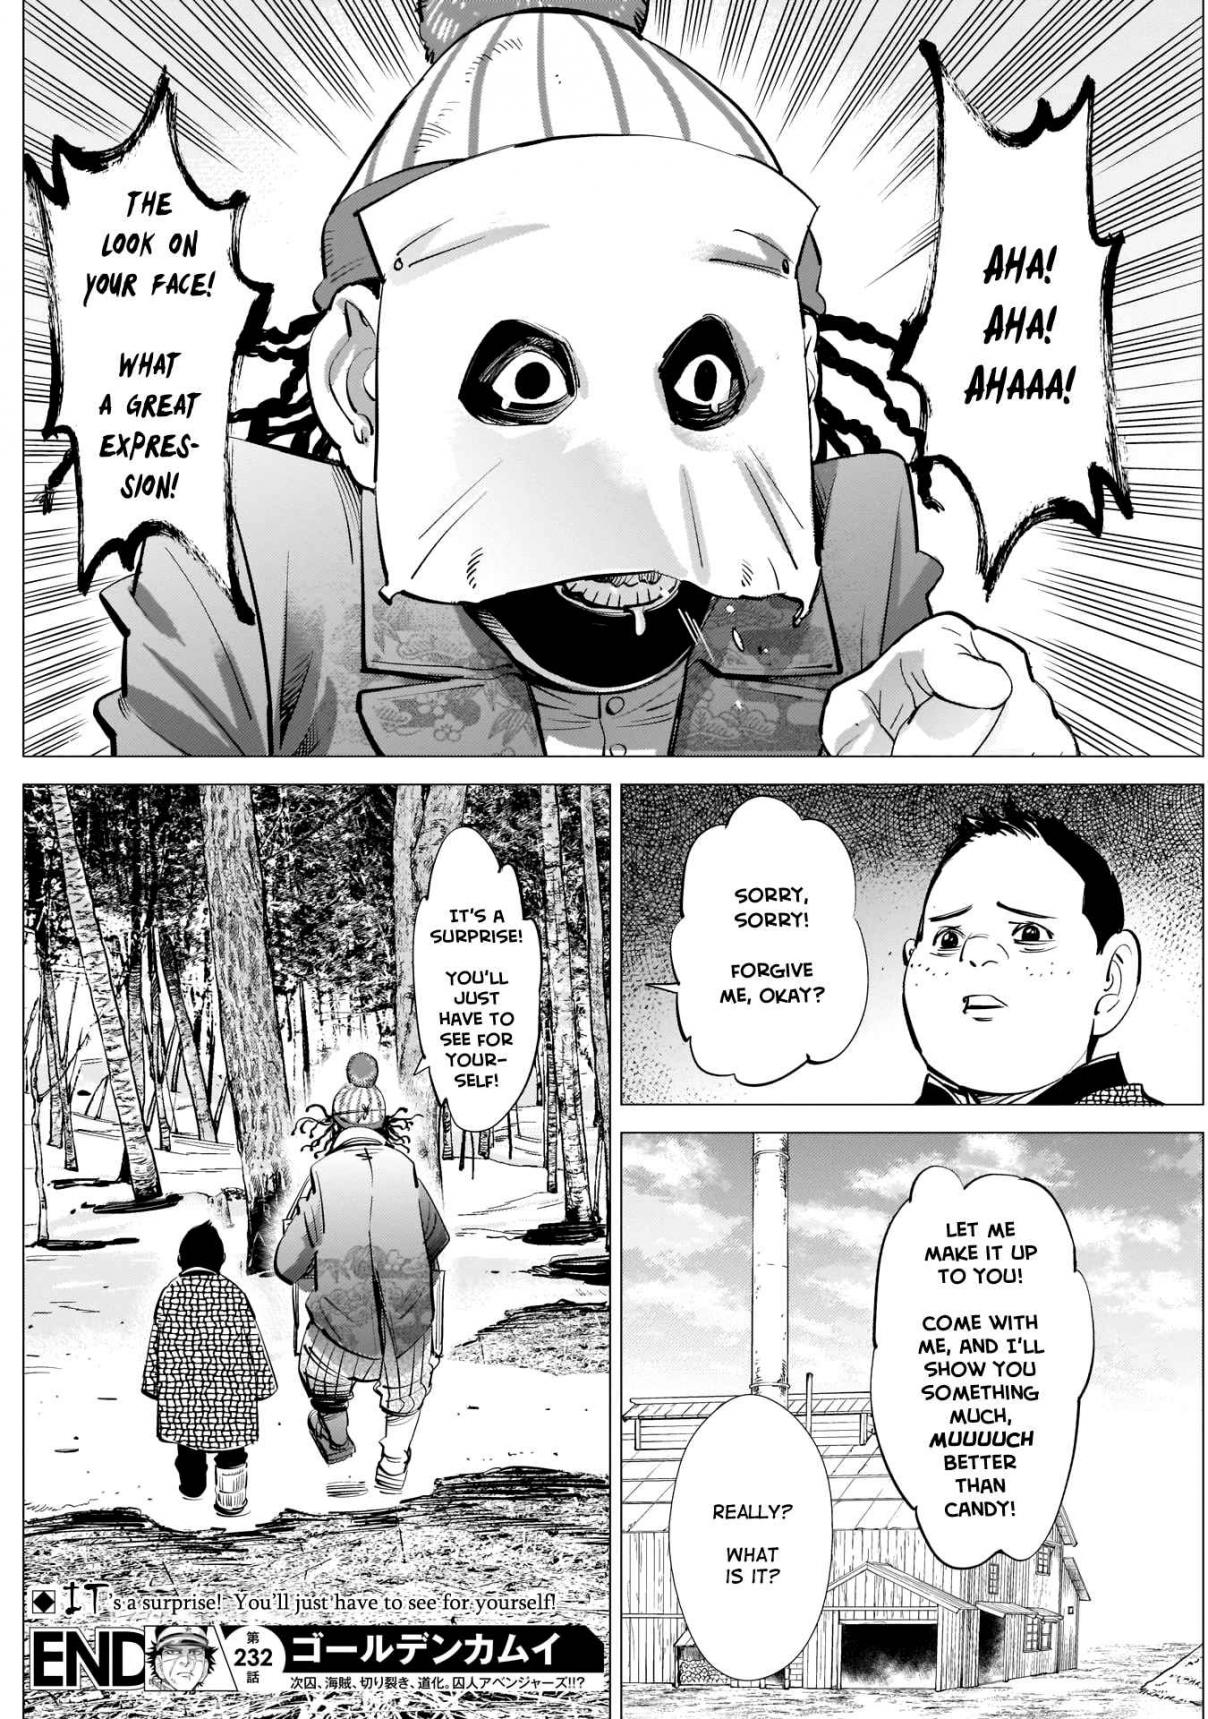 Golden Kamuy Ch. 232 Family